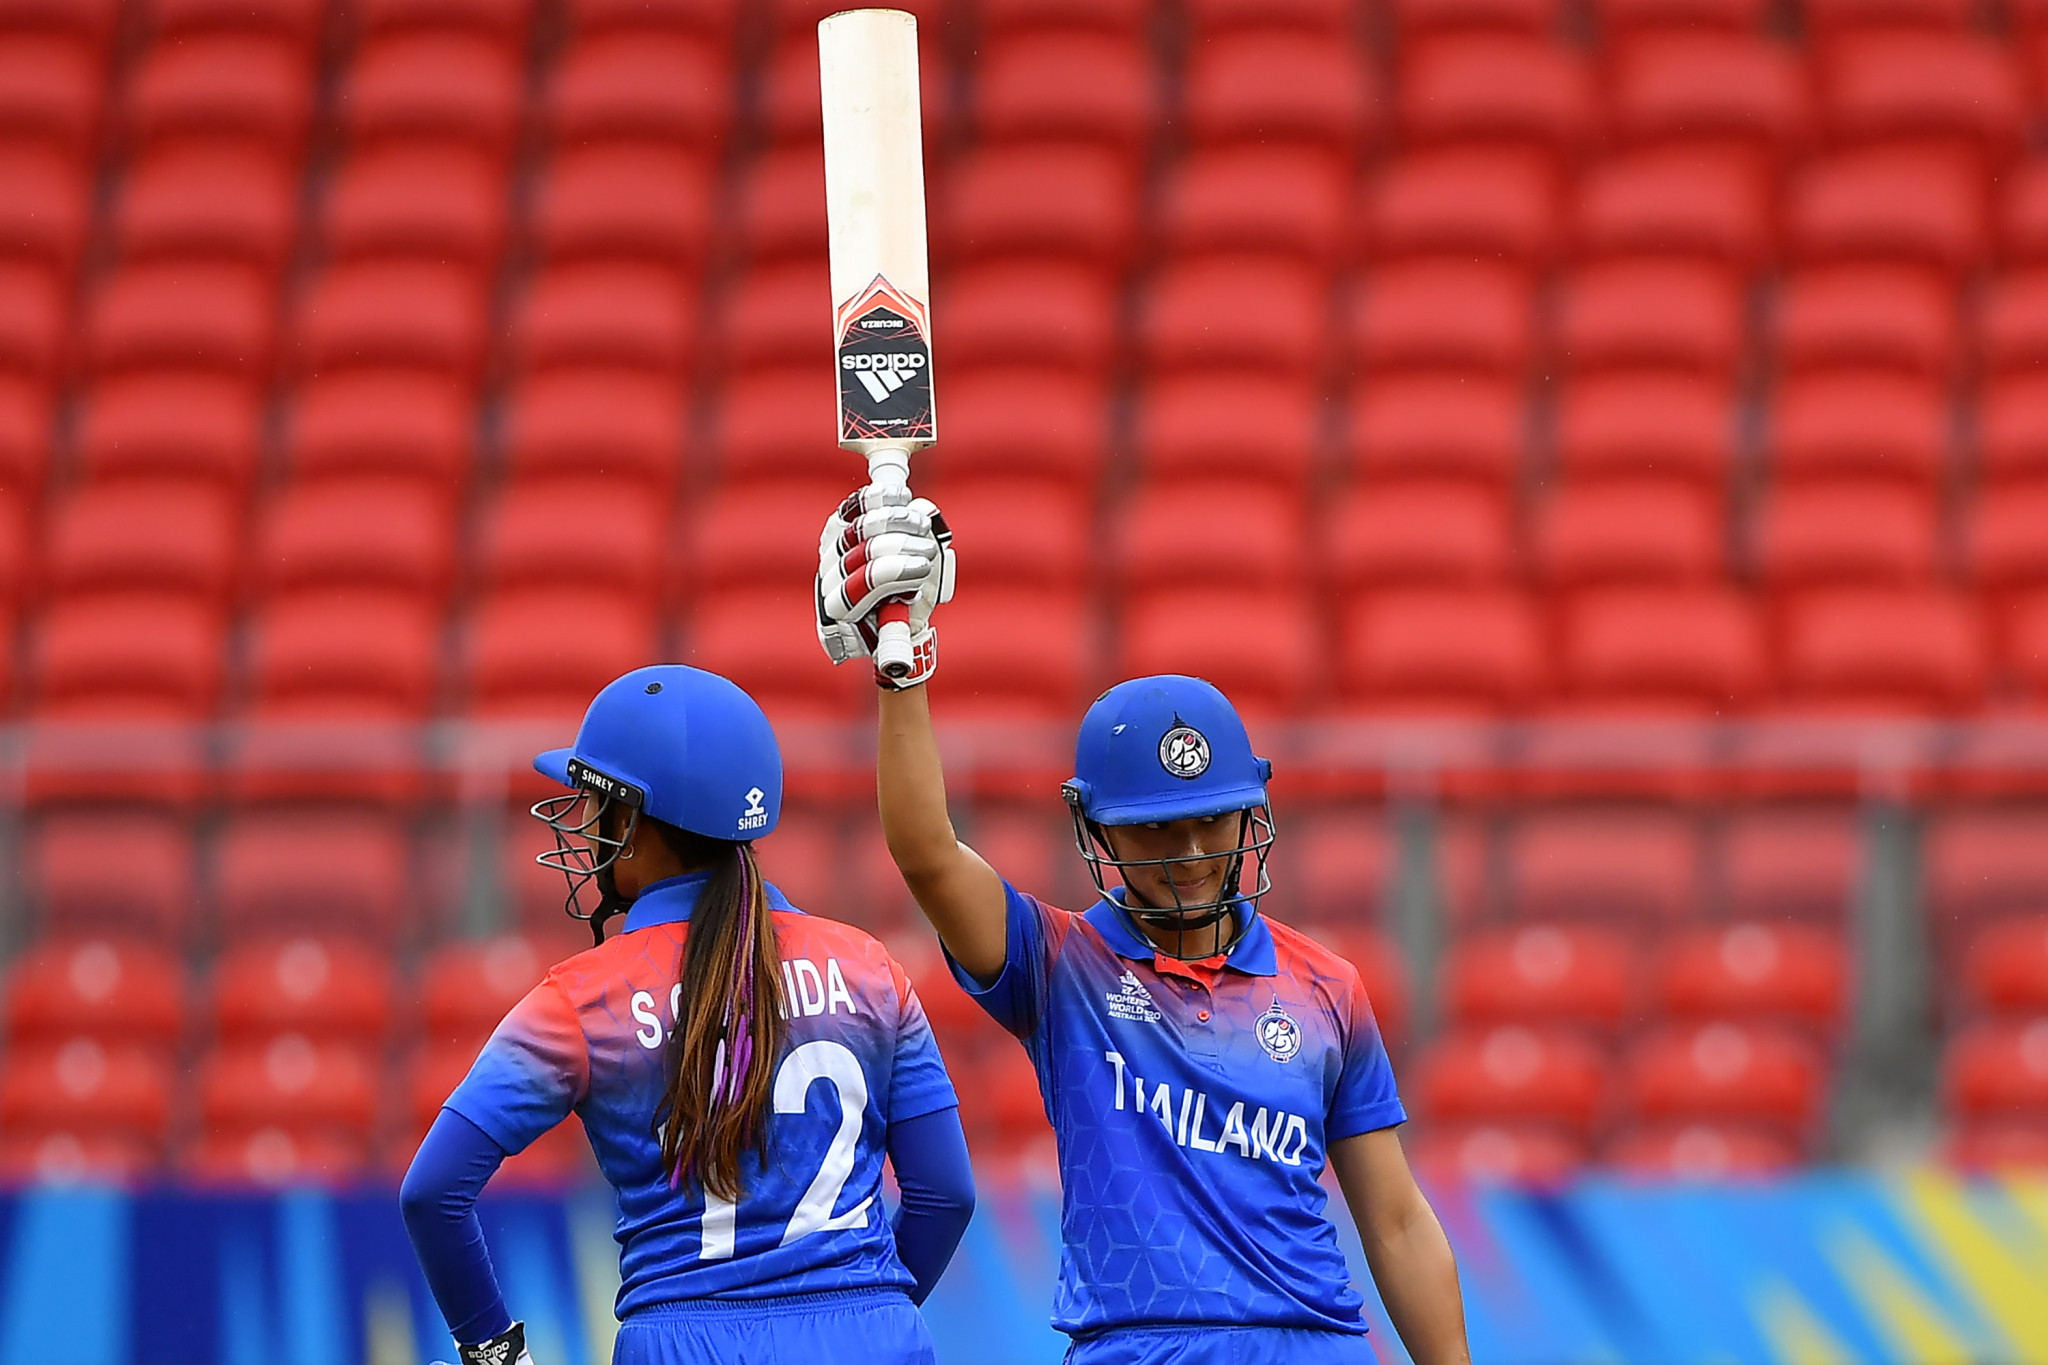 Nattakan Chantam performed well with the bat for Thailand as they were denied the chance of victory  ©Getty Images